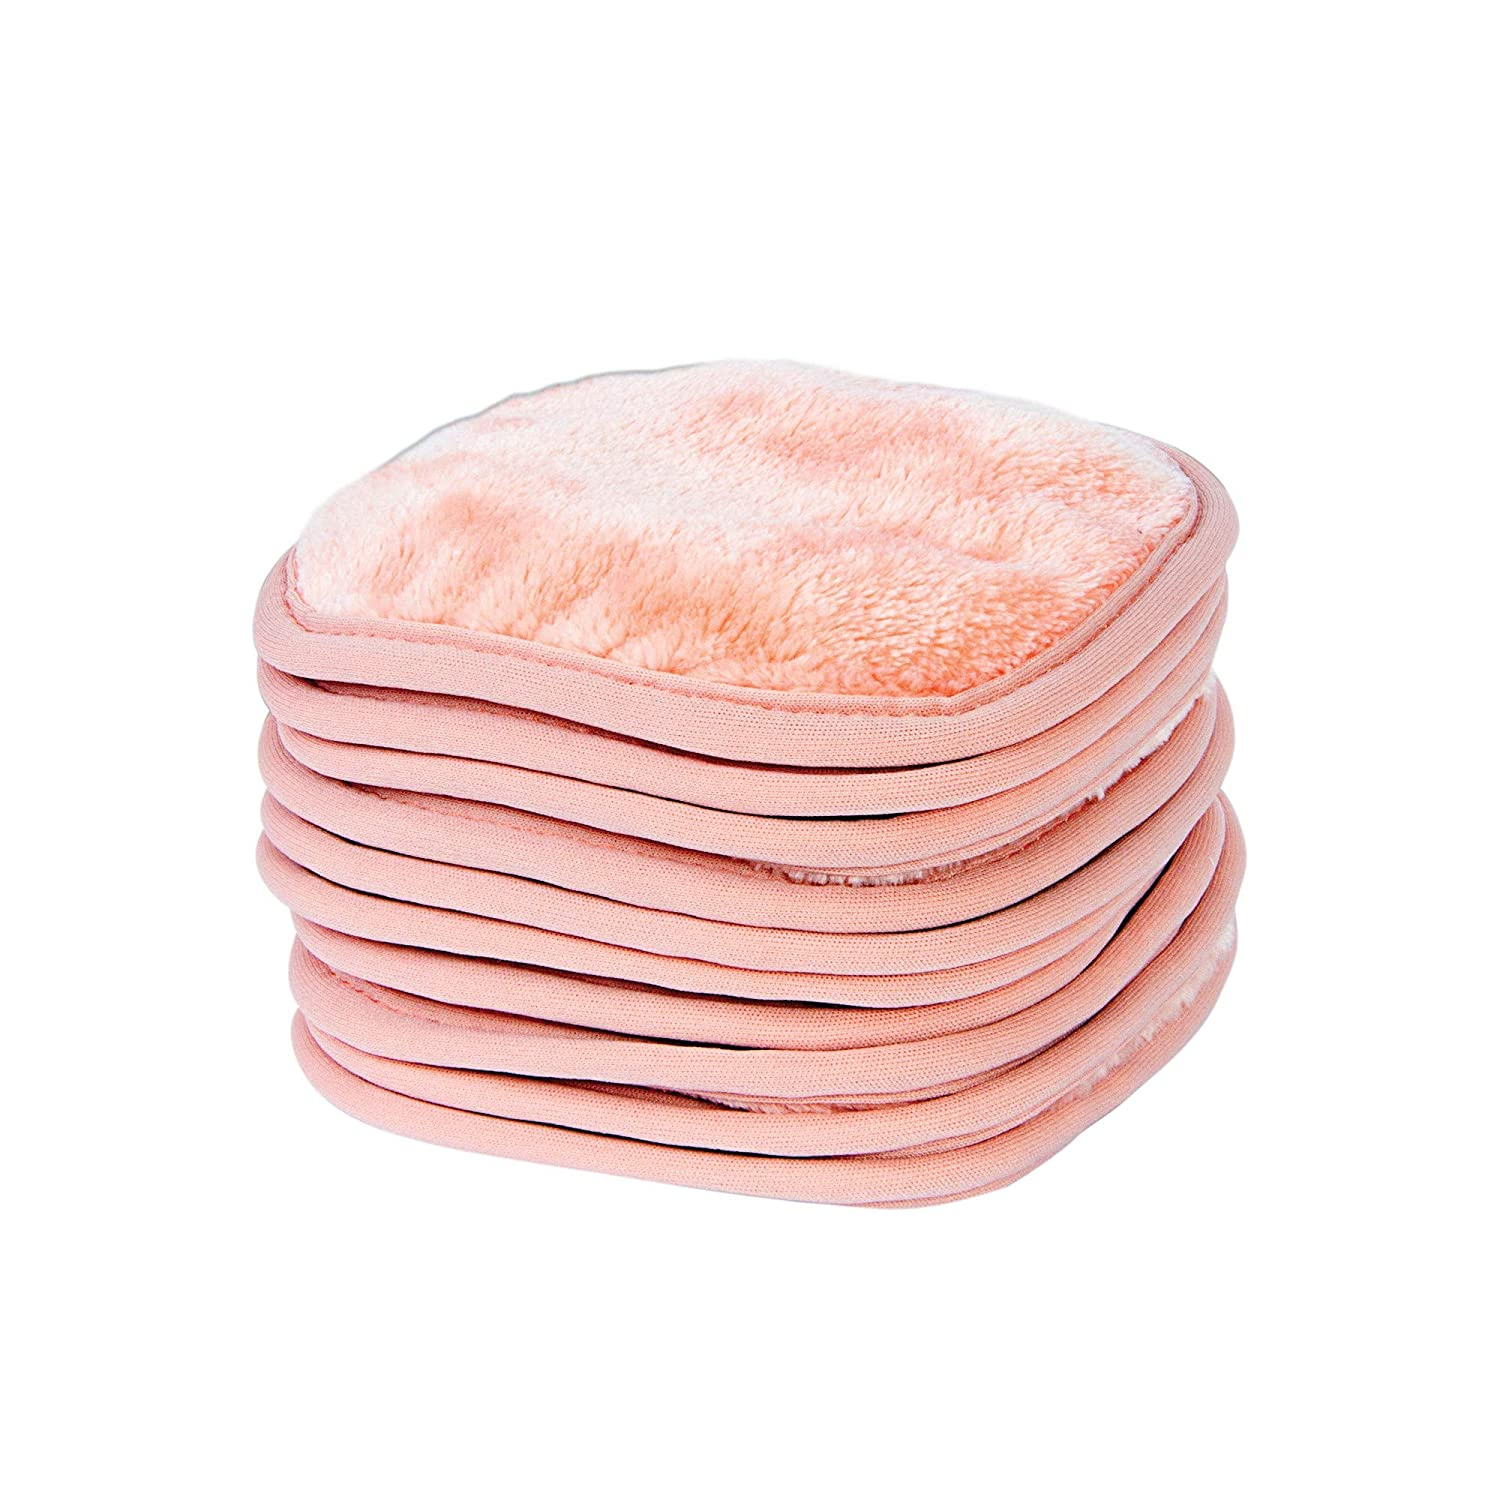 Makeup Removal Cleaning Cloth Washable and Reusable